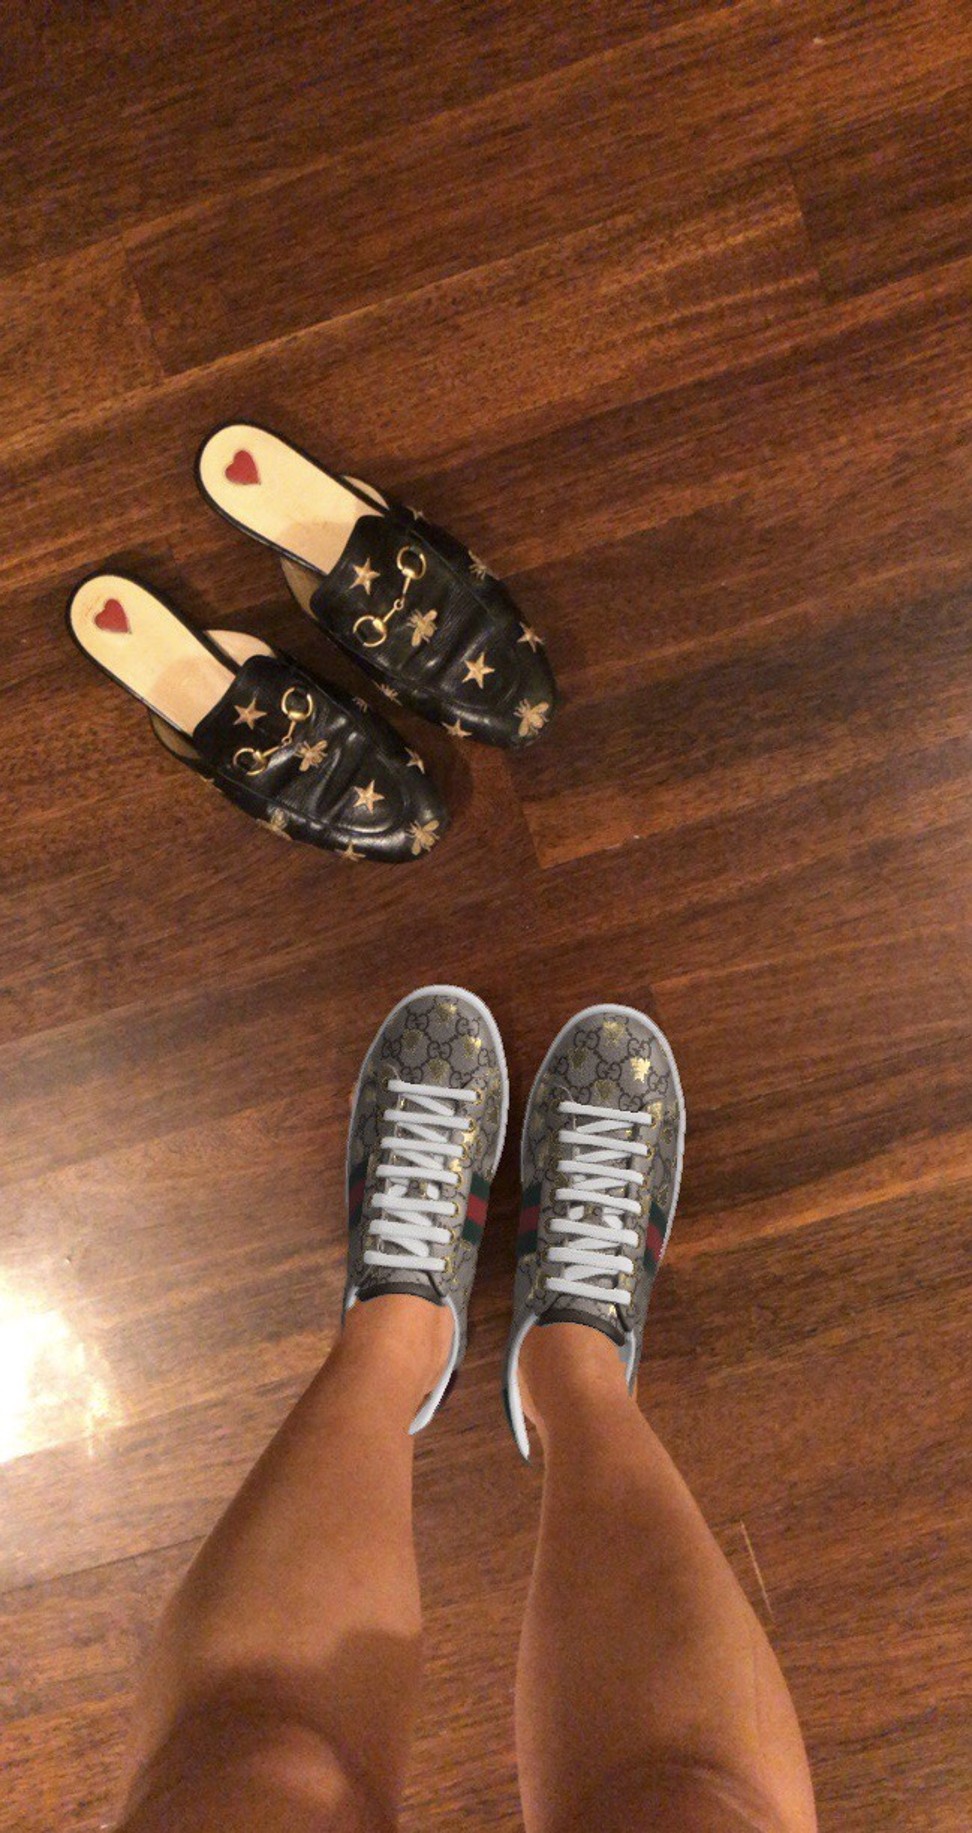 Ace sneakers using an augmented reality 